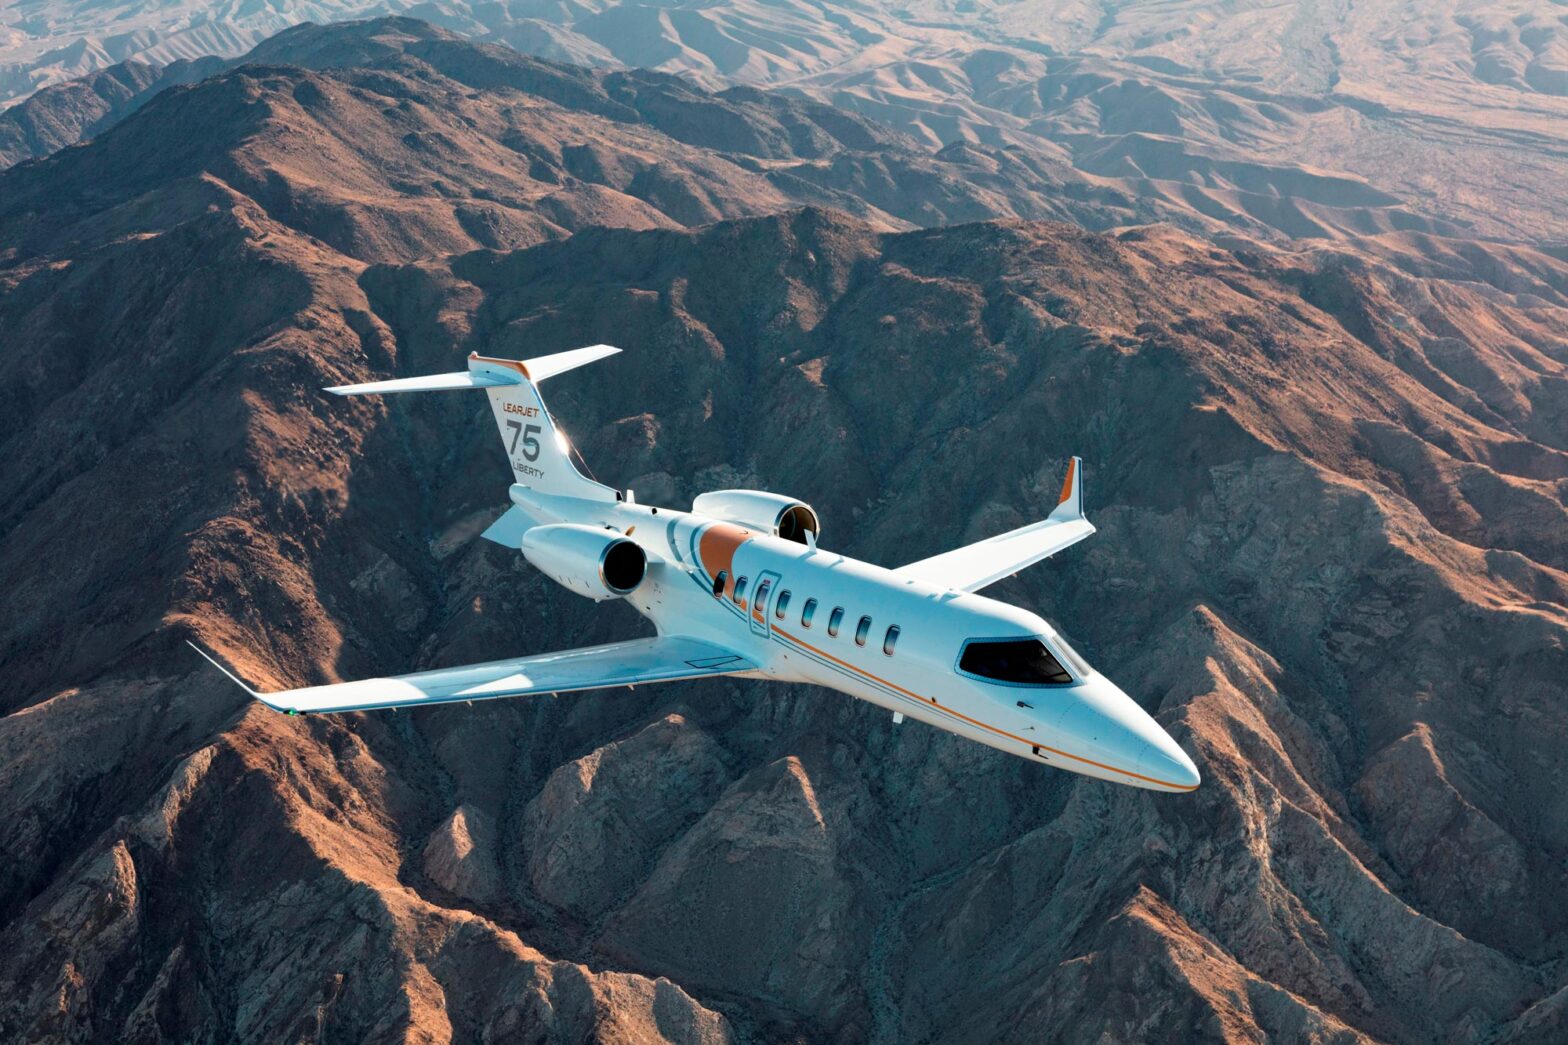 The Learjet Era Ends With a Final Delivery